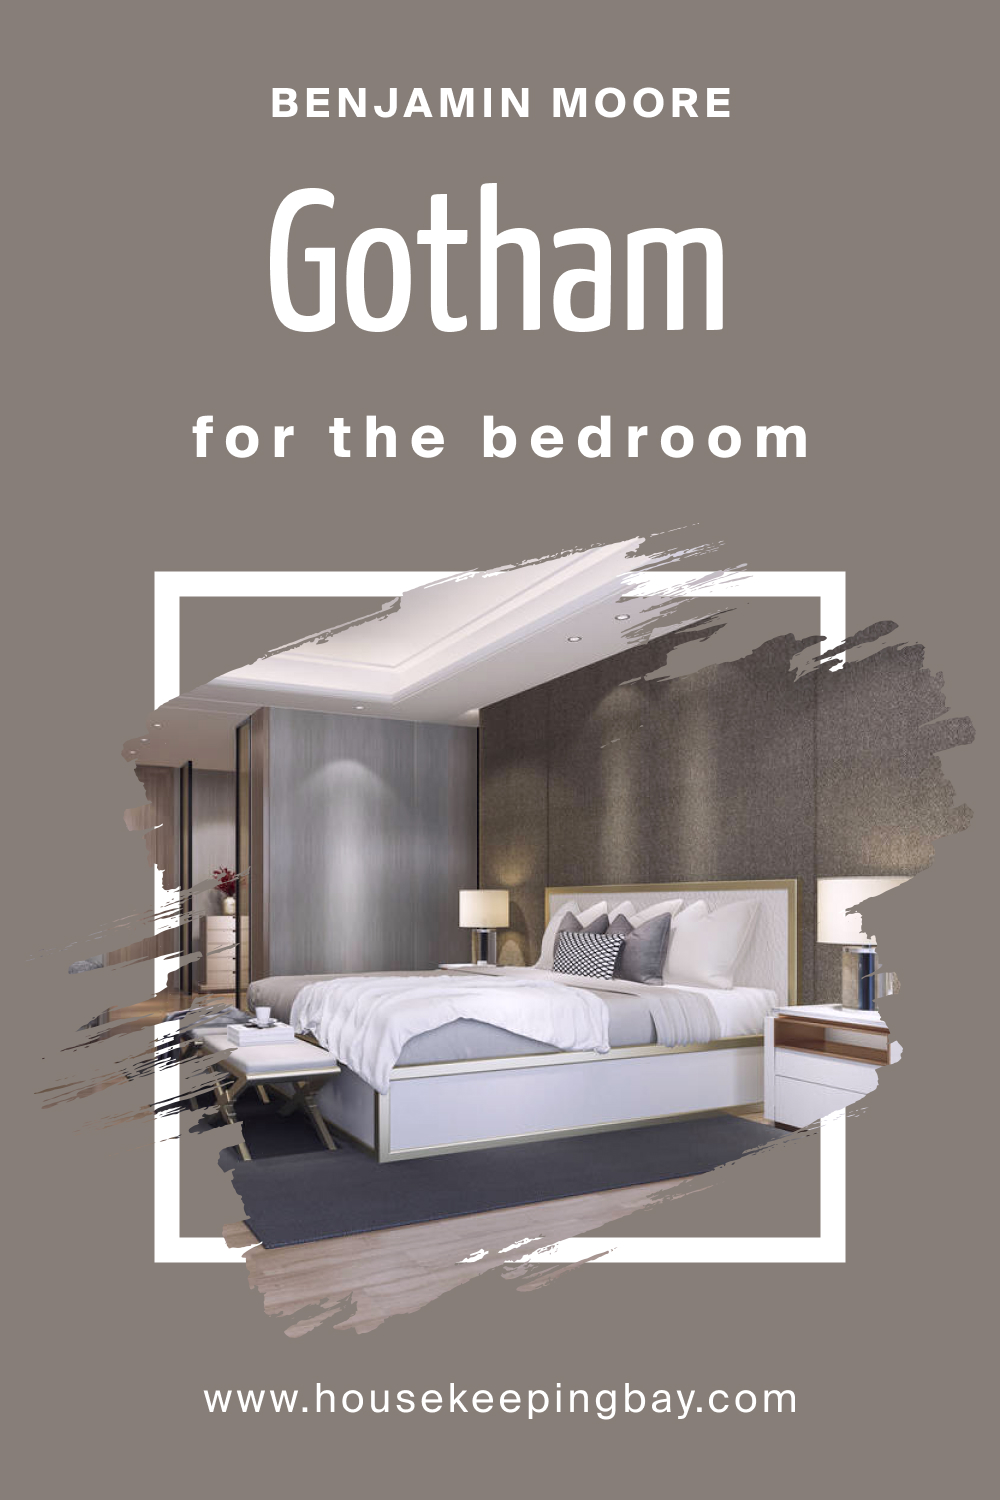 How to Use Gotham CSP-385 in the Bedroom?